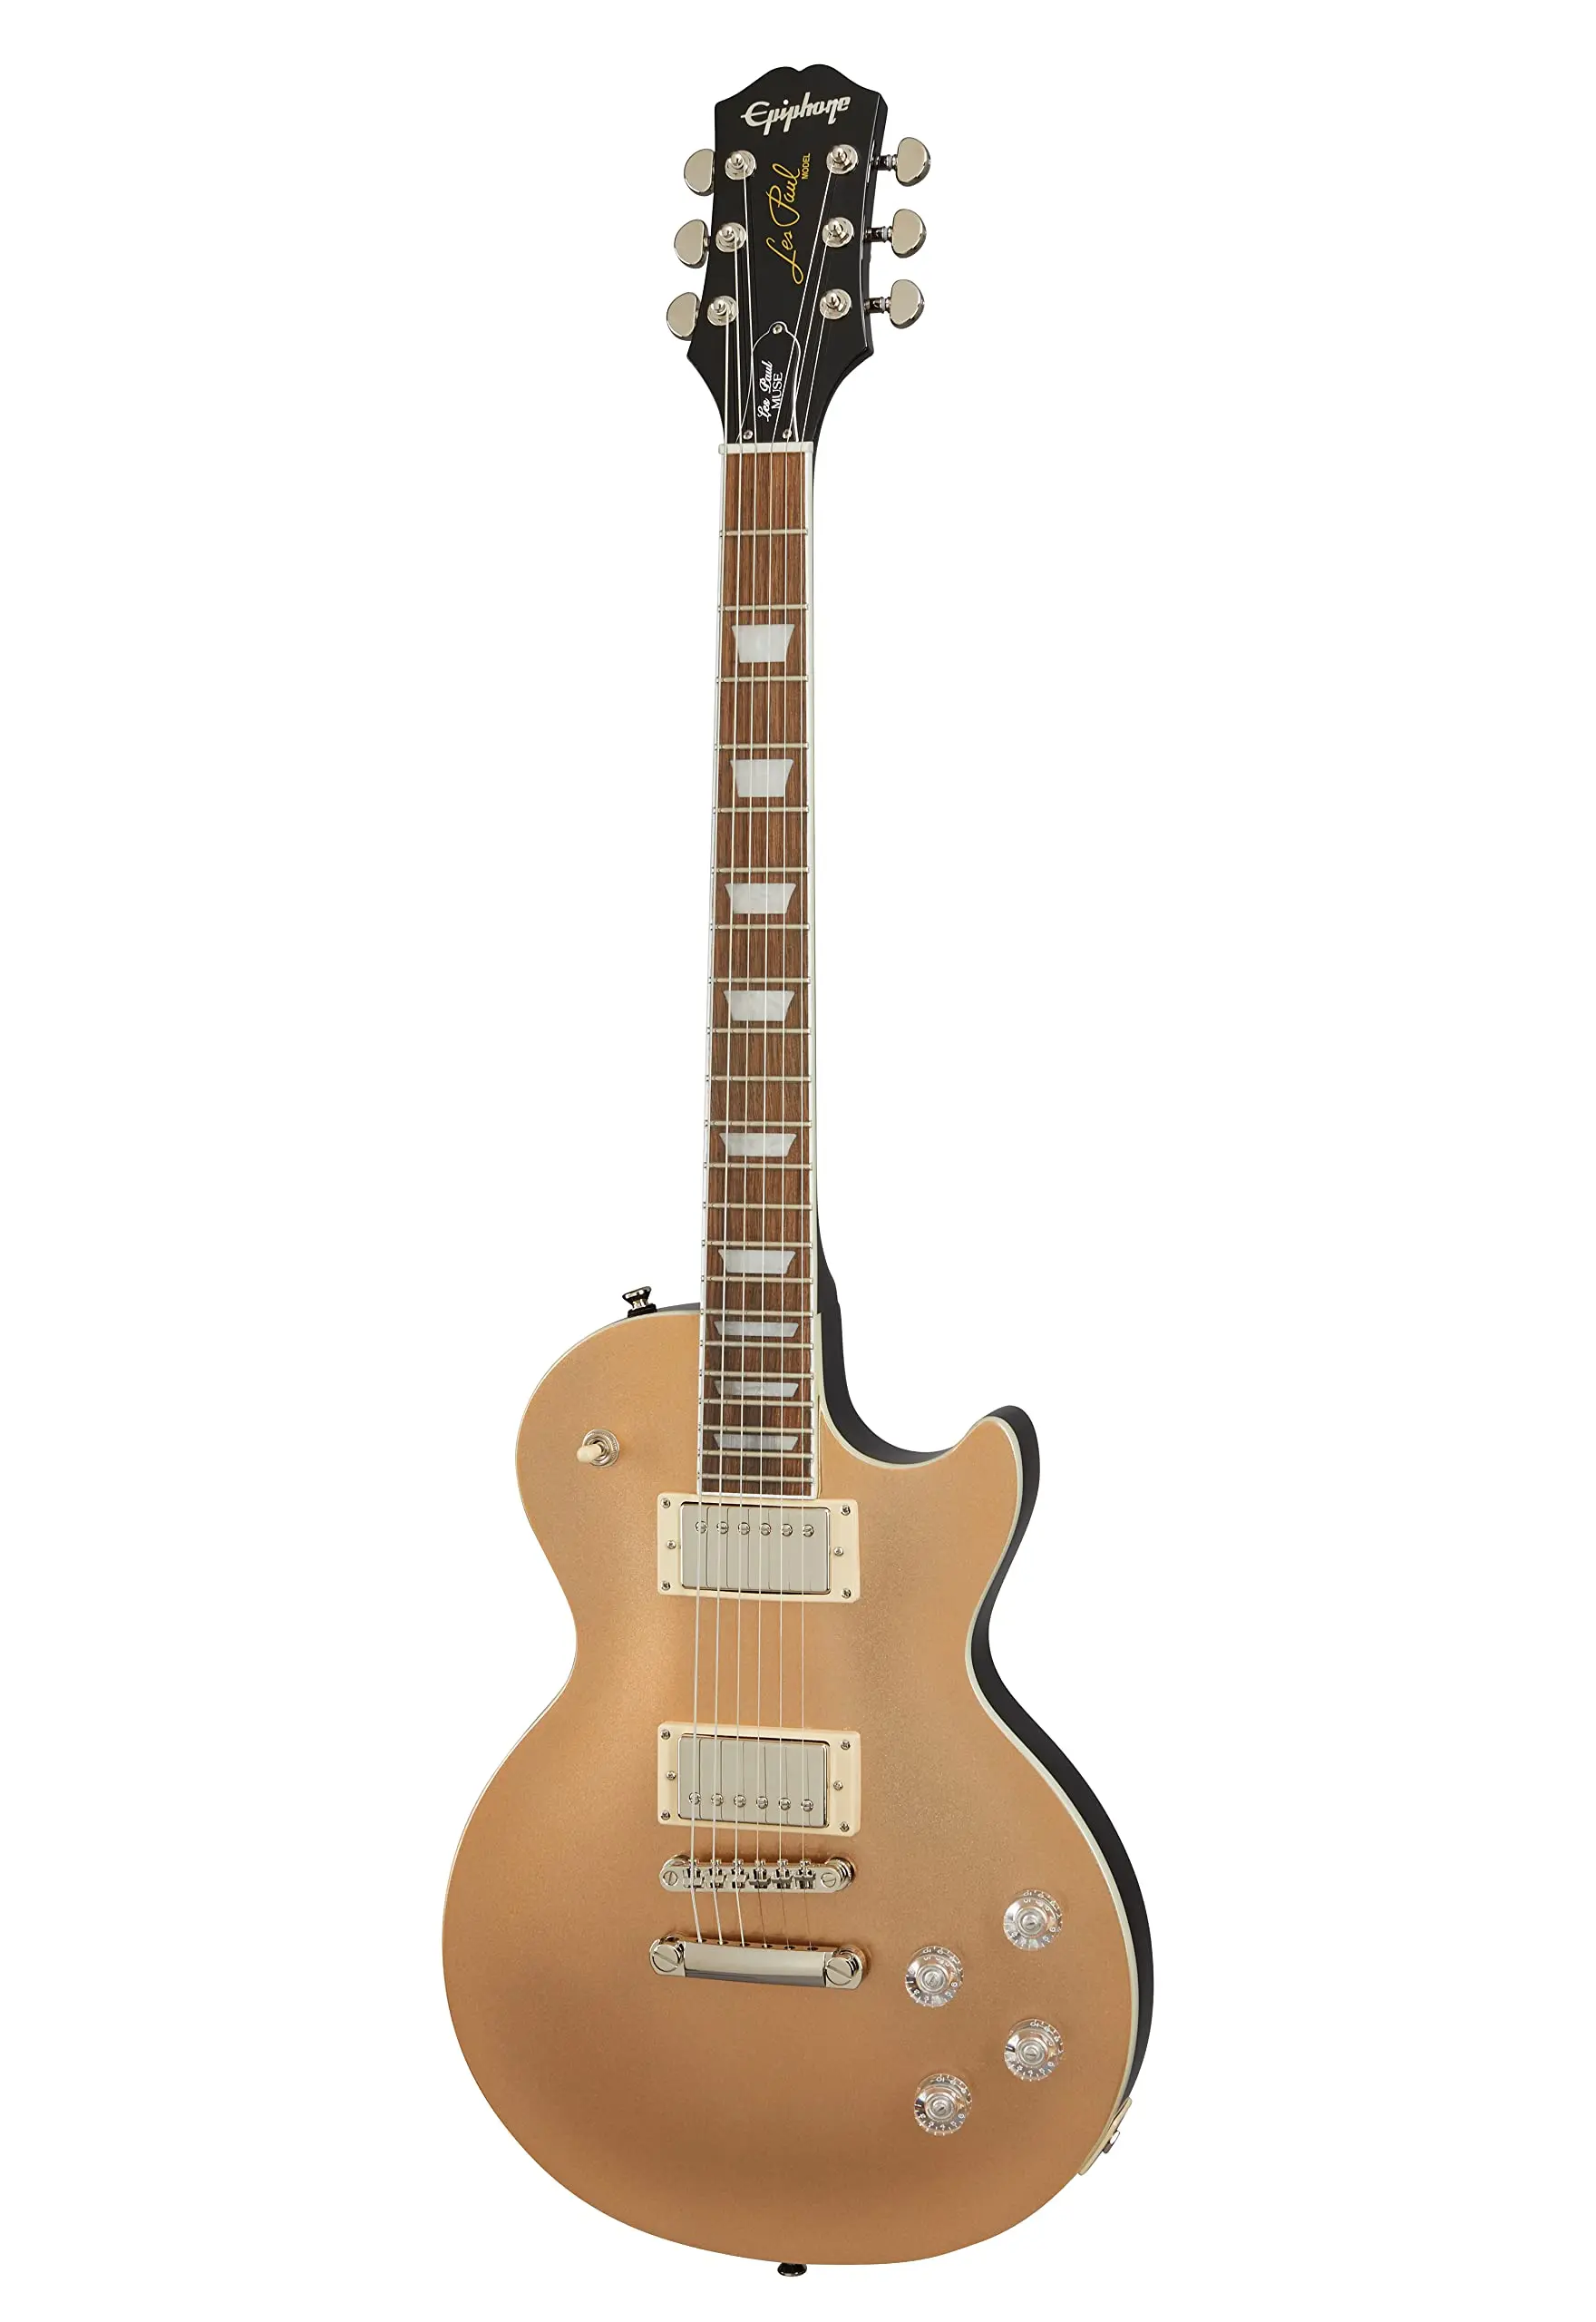 epiphone les paul muse smoked almond metallic - What is Epiphone Muse